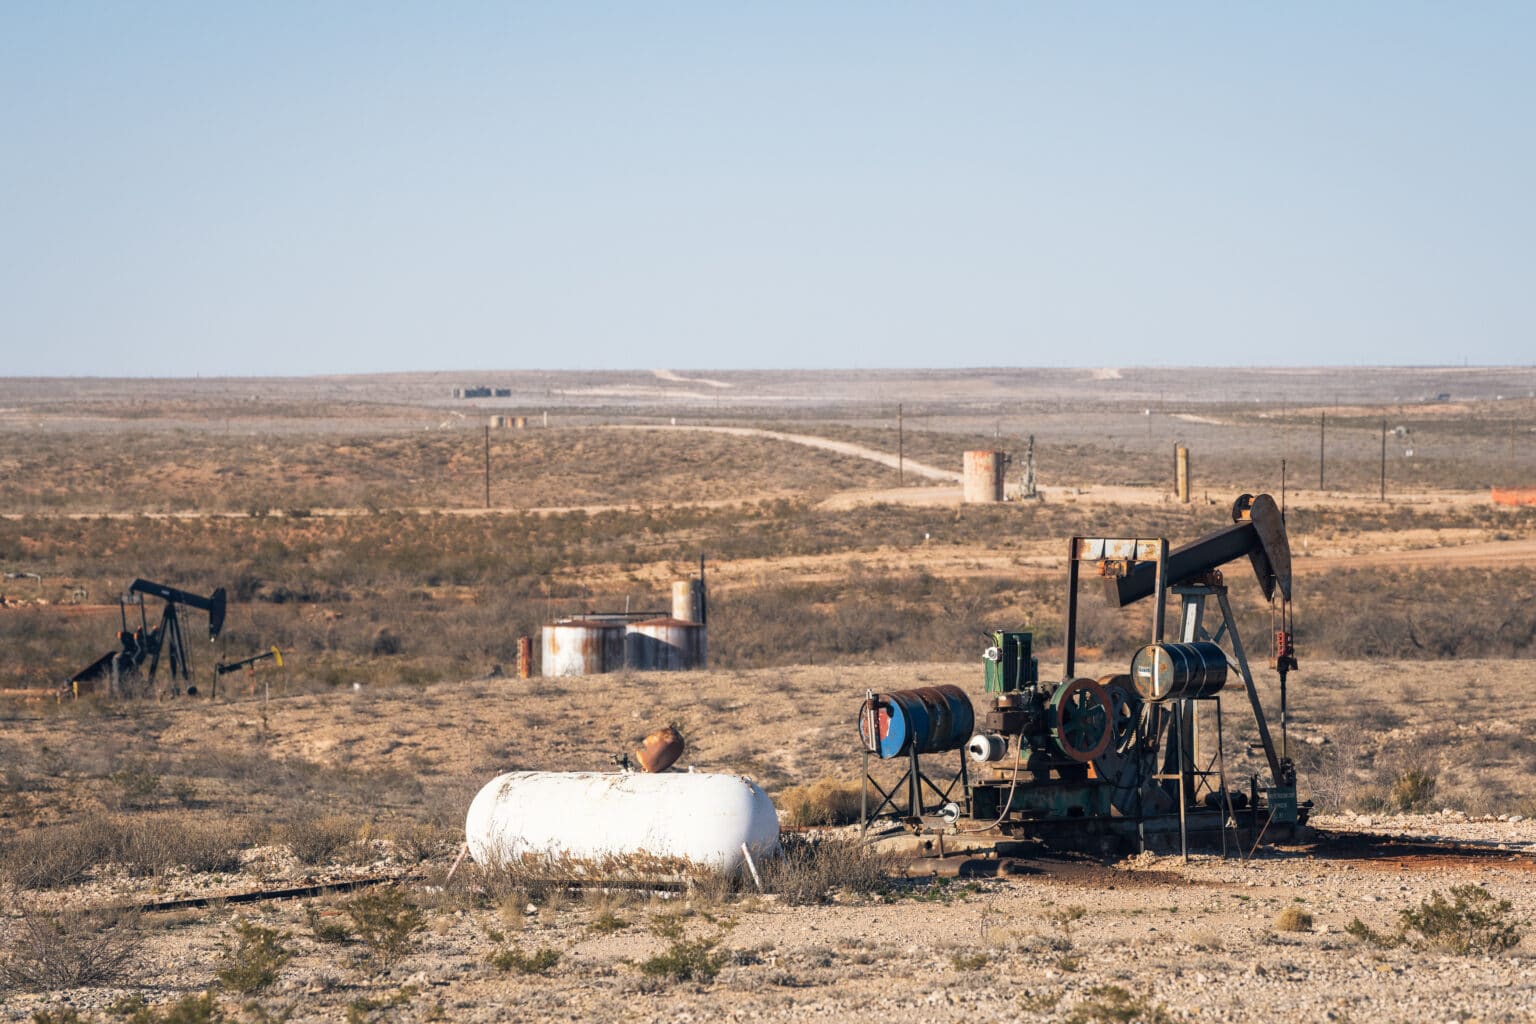 Several old pumpjacks dot the dry flat landscape of the Permian Basin